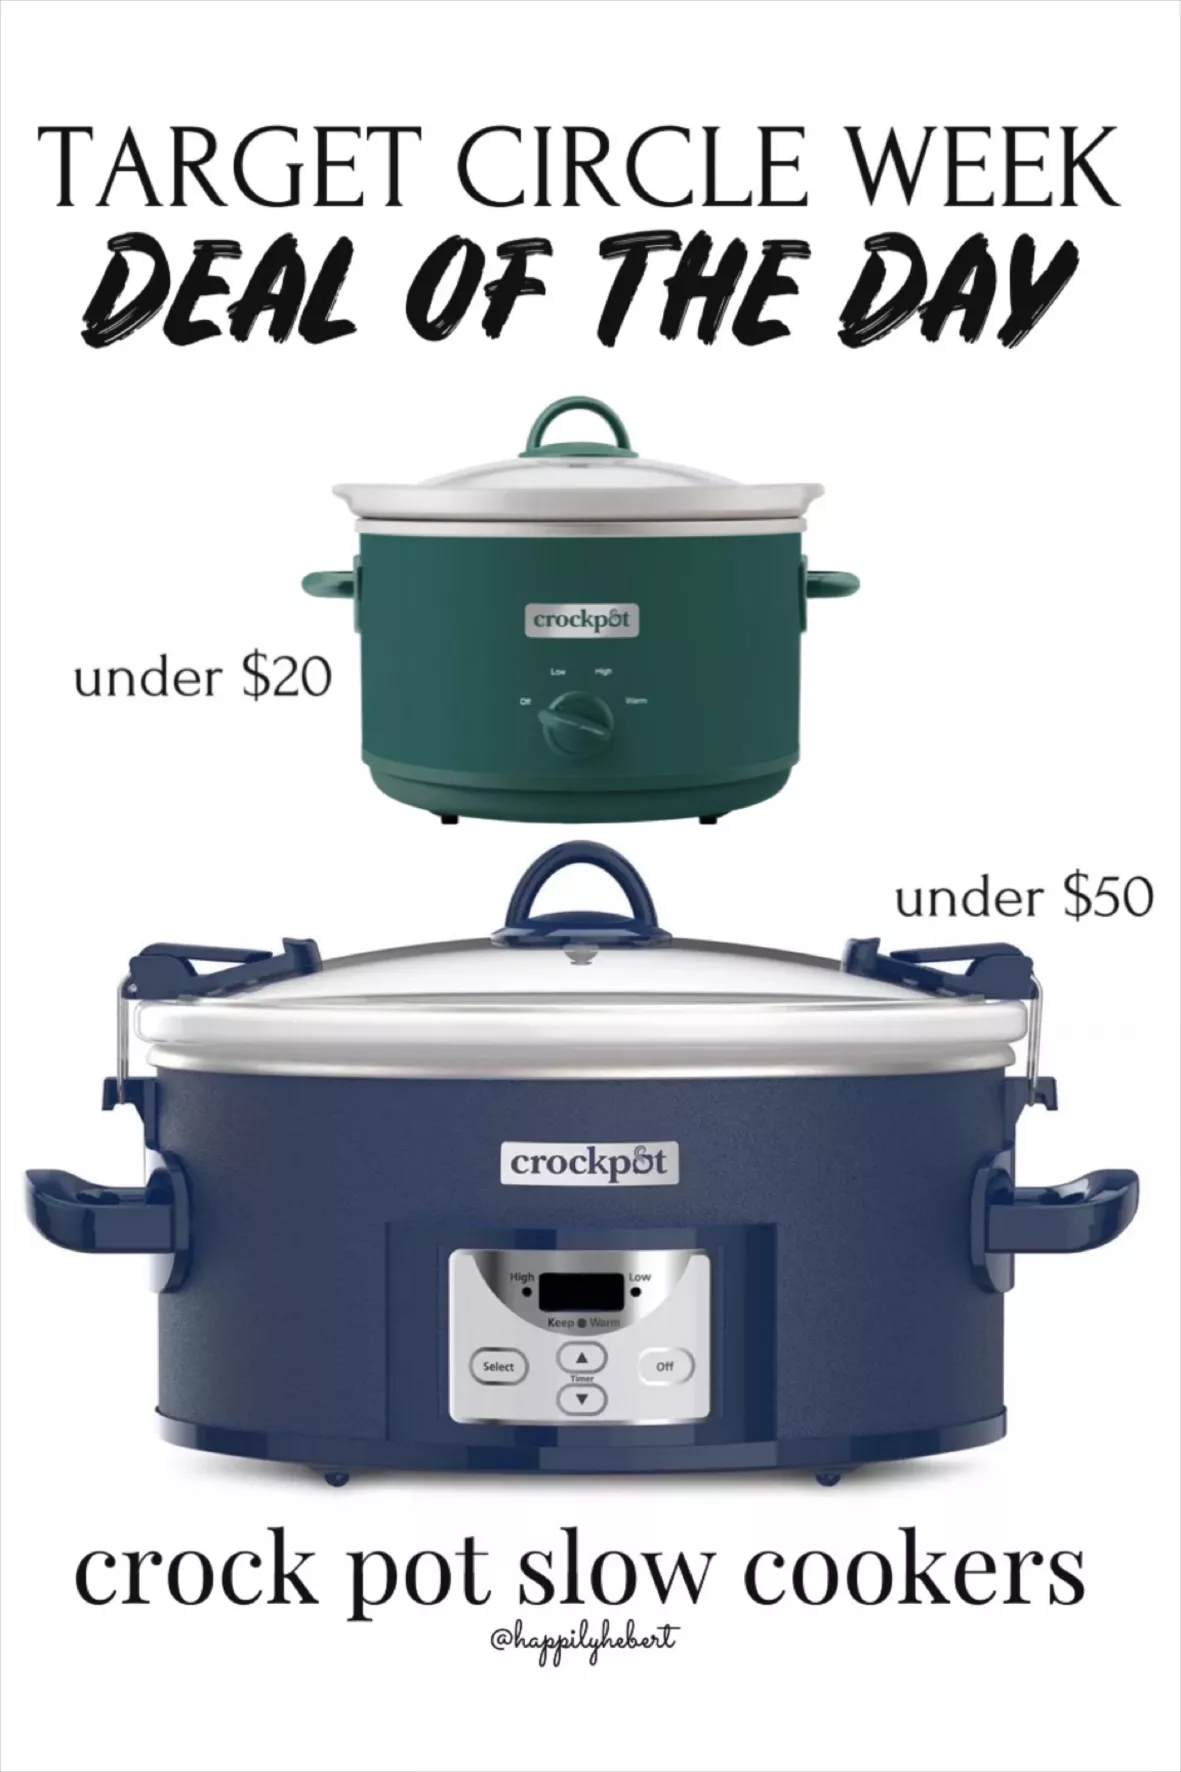 Crock-pot 7qt One Touch Cook And Carry Slow Cooker - Blue : Target